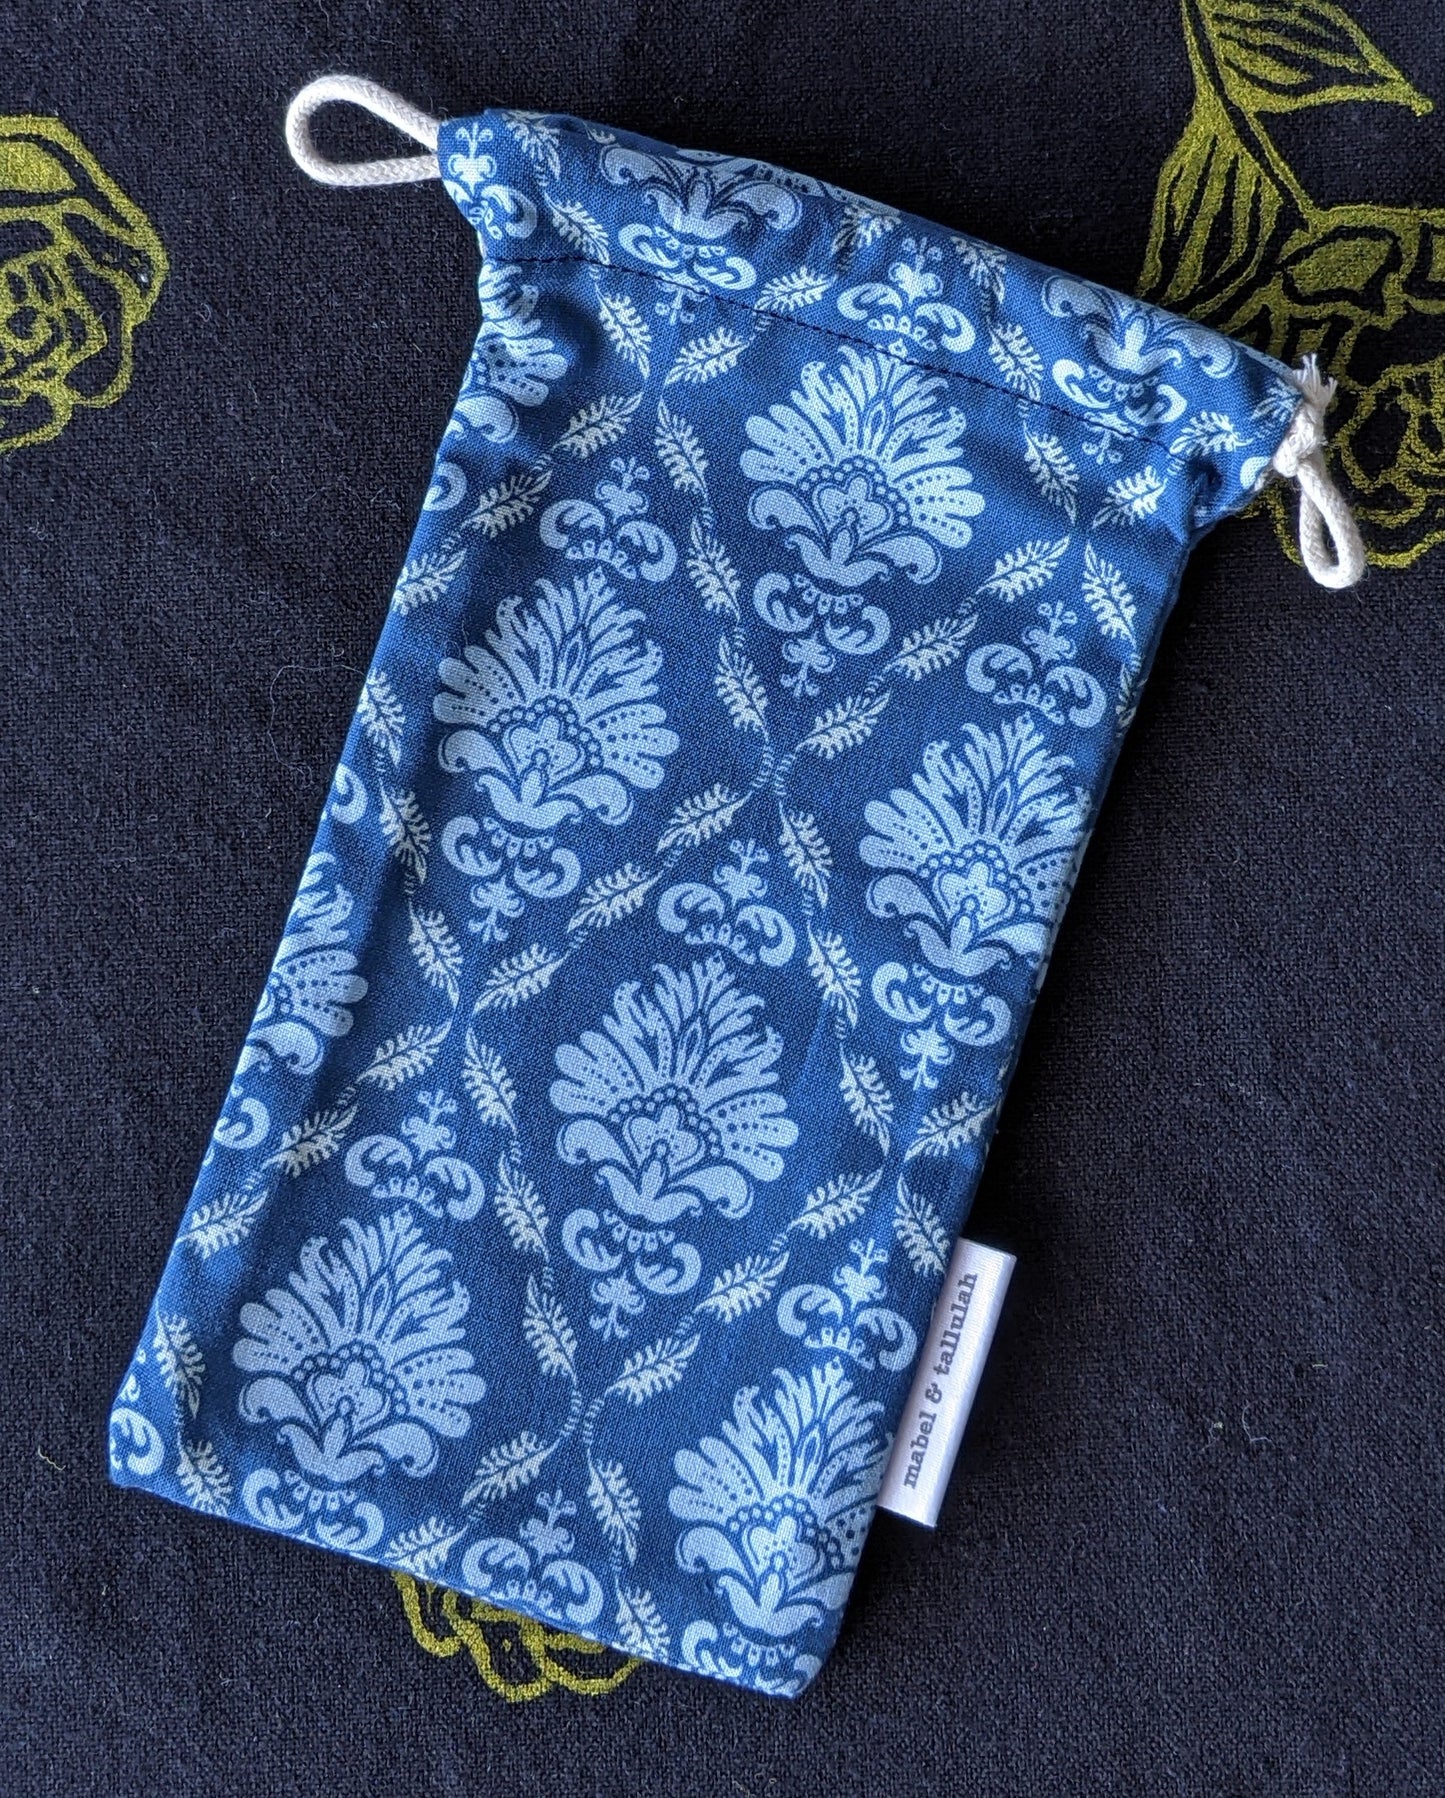 Blue pattern sunglasses cover mini pouch by The Arthly Box